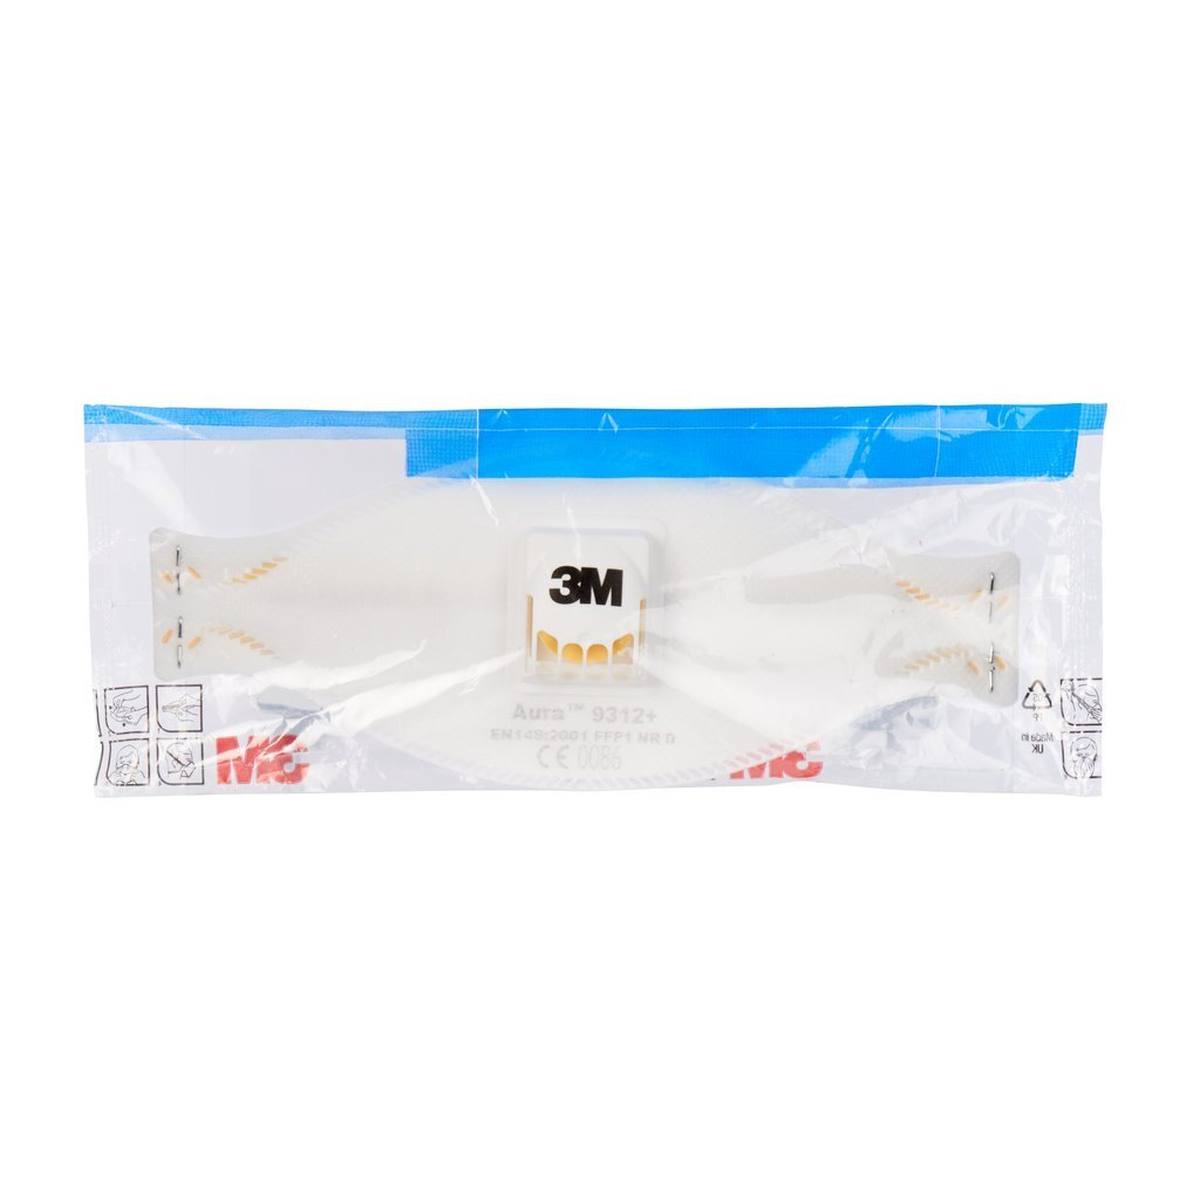 3M 9312 Aura respirator FFP1 with cool-flow exhalation valve, up to 4 times the limit value (hygienically individually packaged)